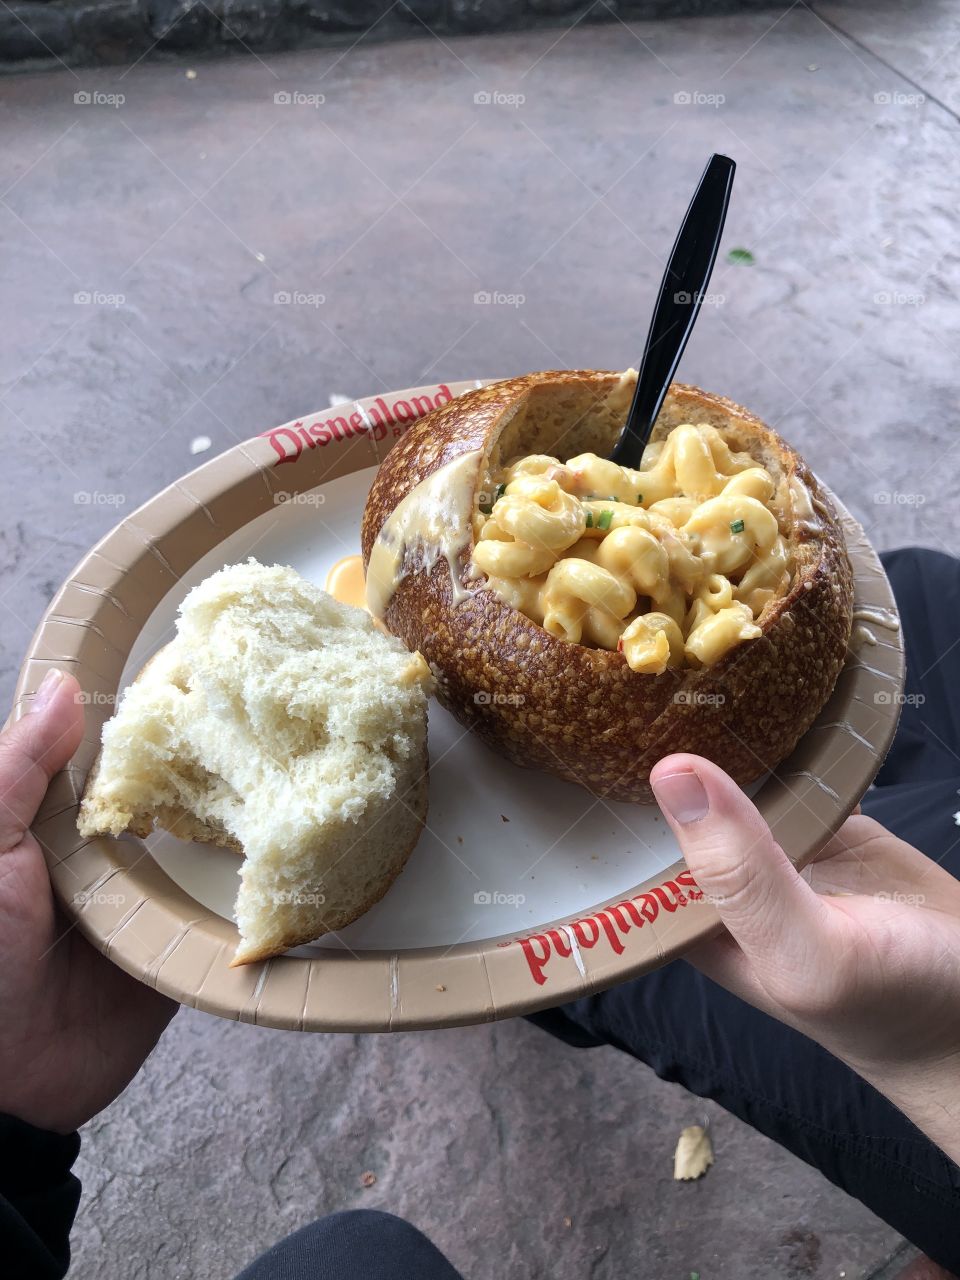 Lobster macarroni and cheese at disneyland